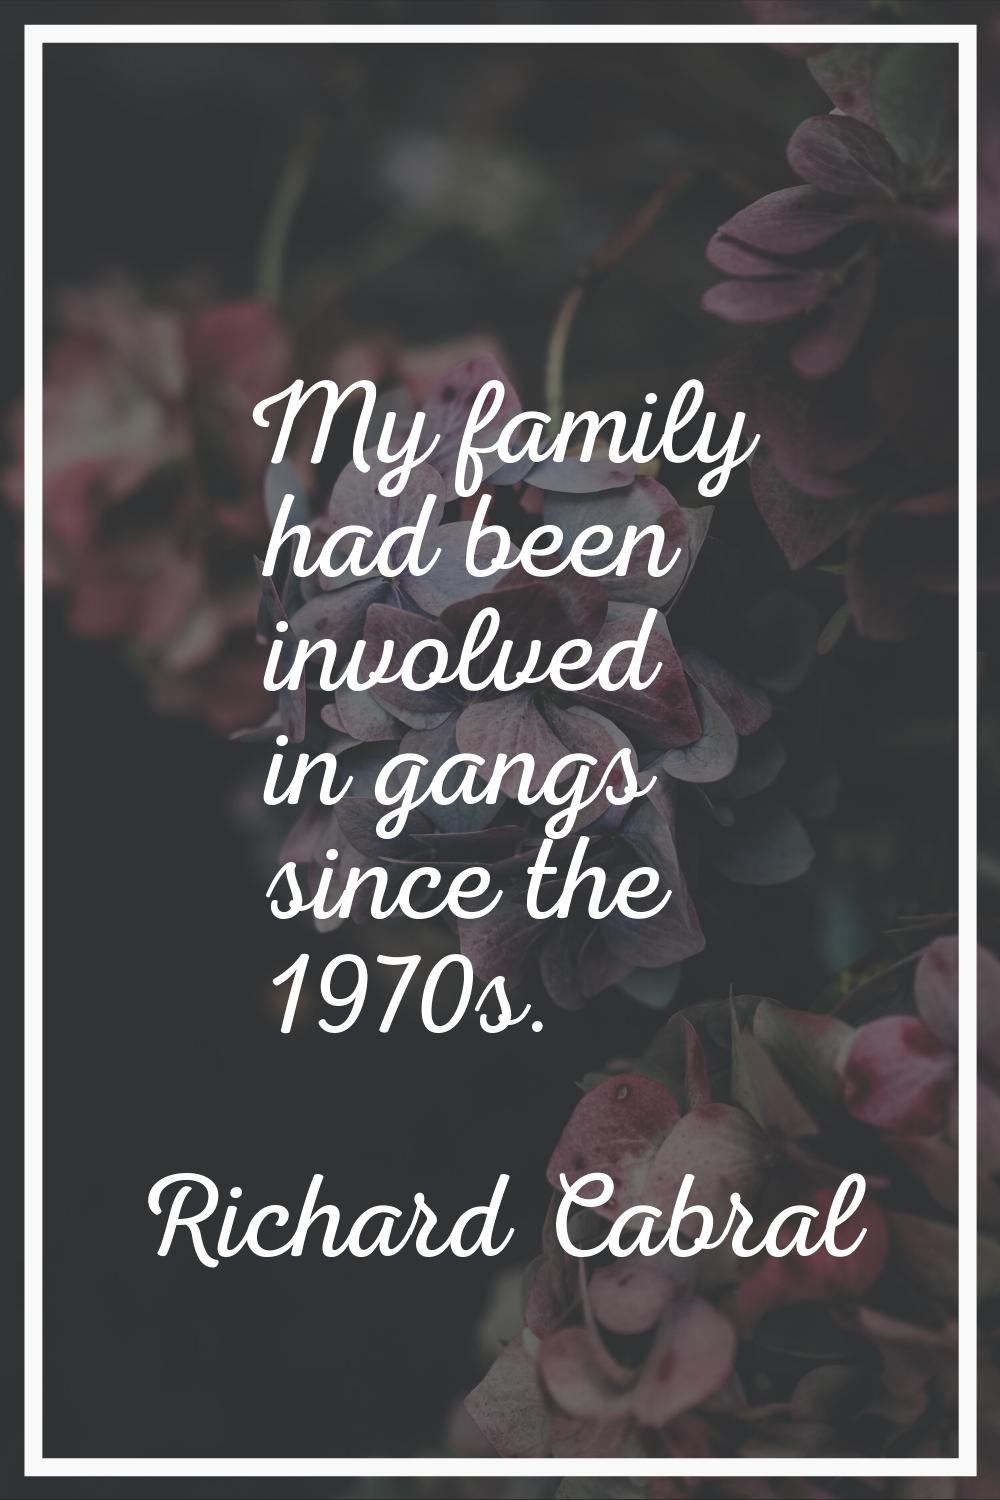 My family had been involved in gangs since the 1970s.